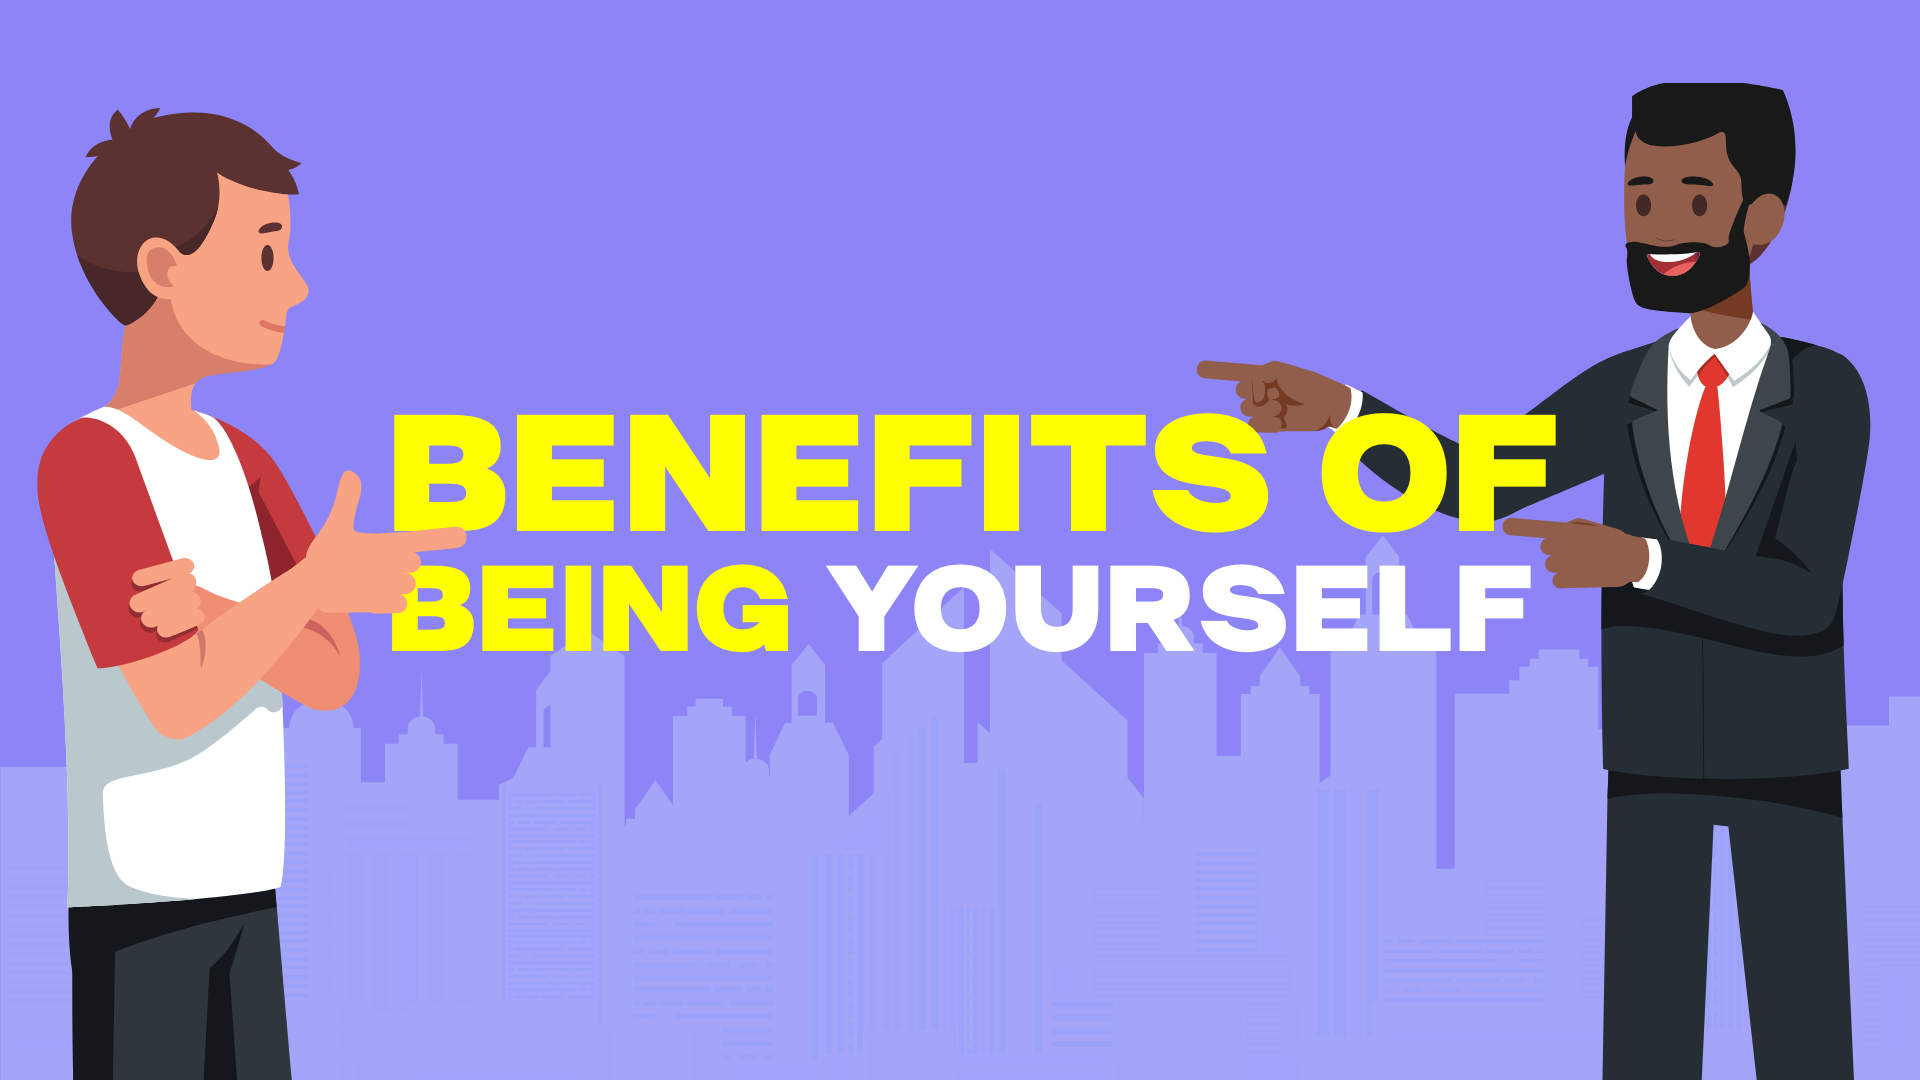 Benefits-of-being-yourself-1